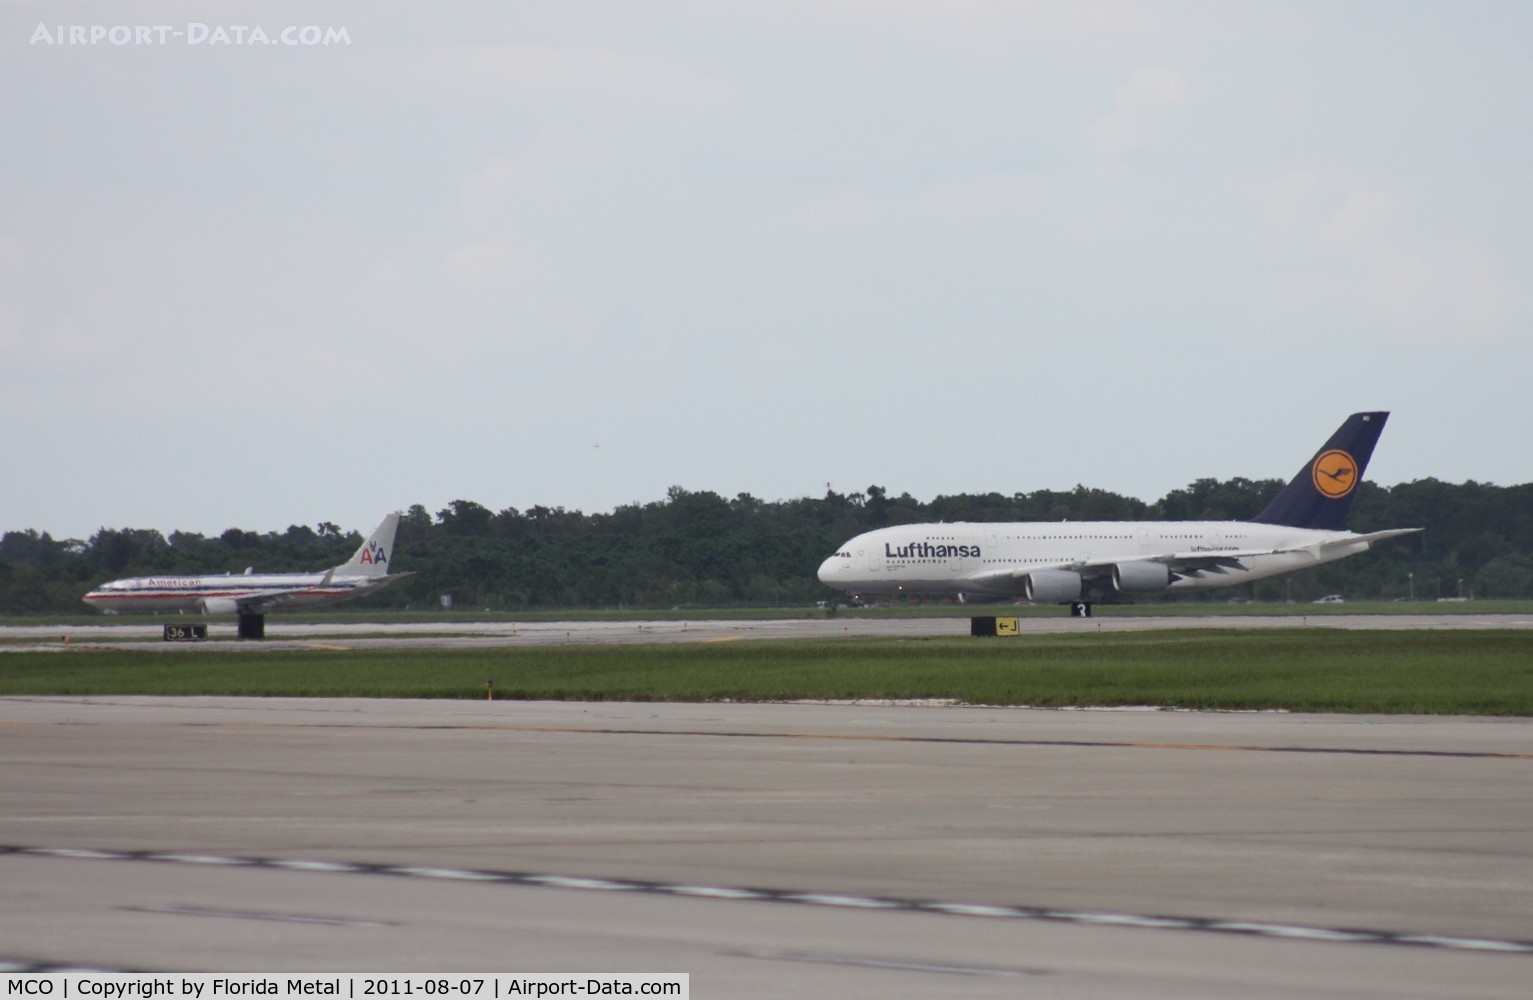 Orlando International Airport (MCO) - A380 lining up to depart on Runway 18R